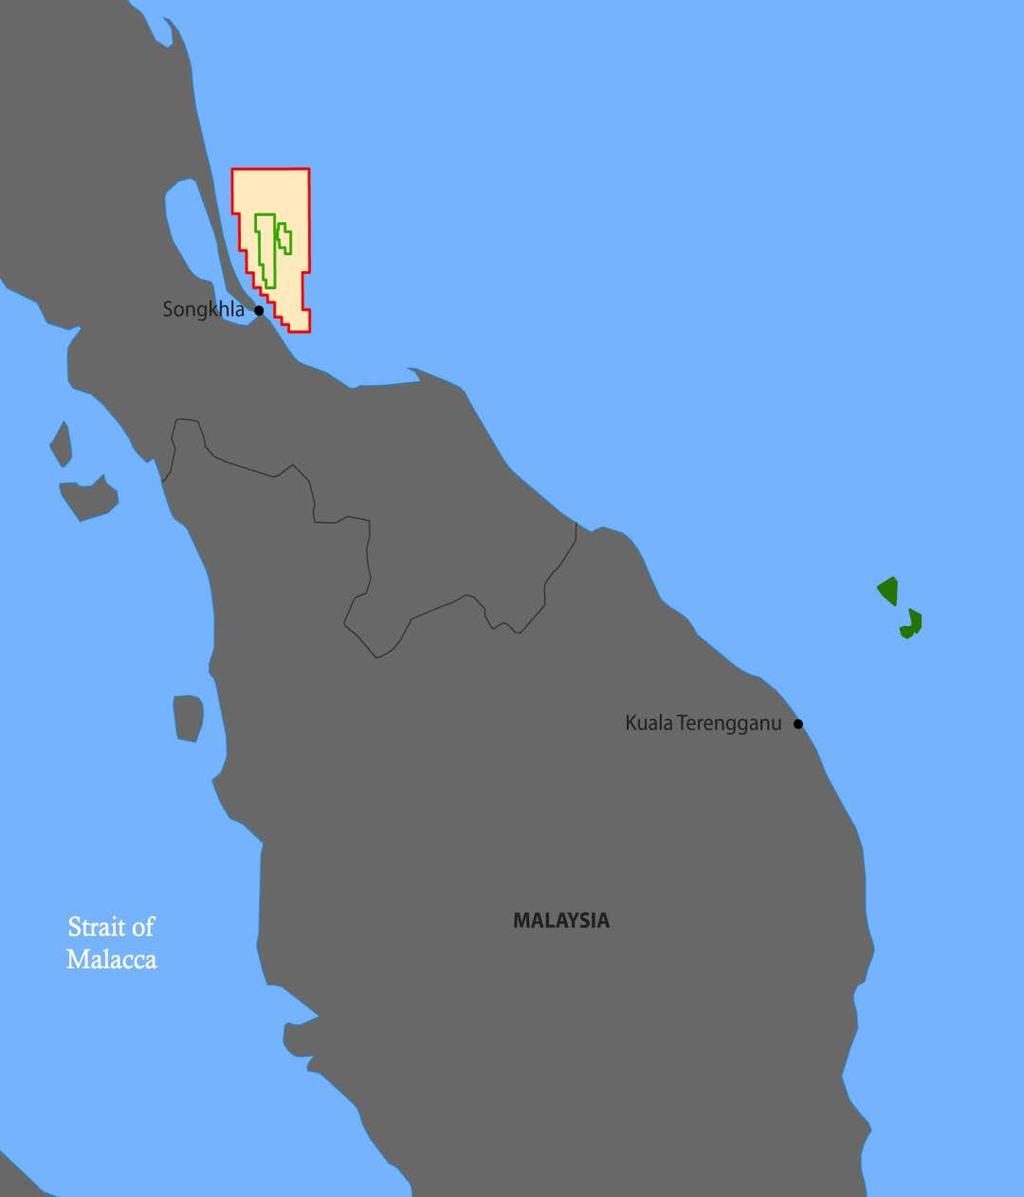 Malaysia RSC Contract Coastal is developing the Kapal, Banang and Meranti fields (KBM) offshore Malaysia for Petronas Coastal is a 70% partner and a local Malaysian contractor (Petra) is